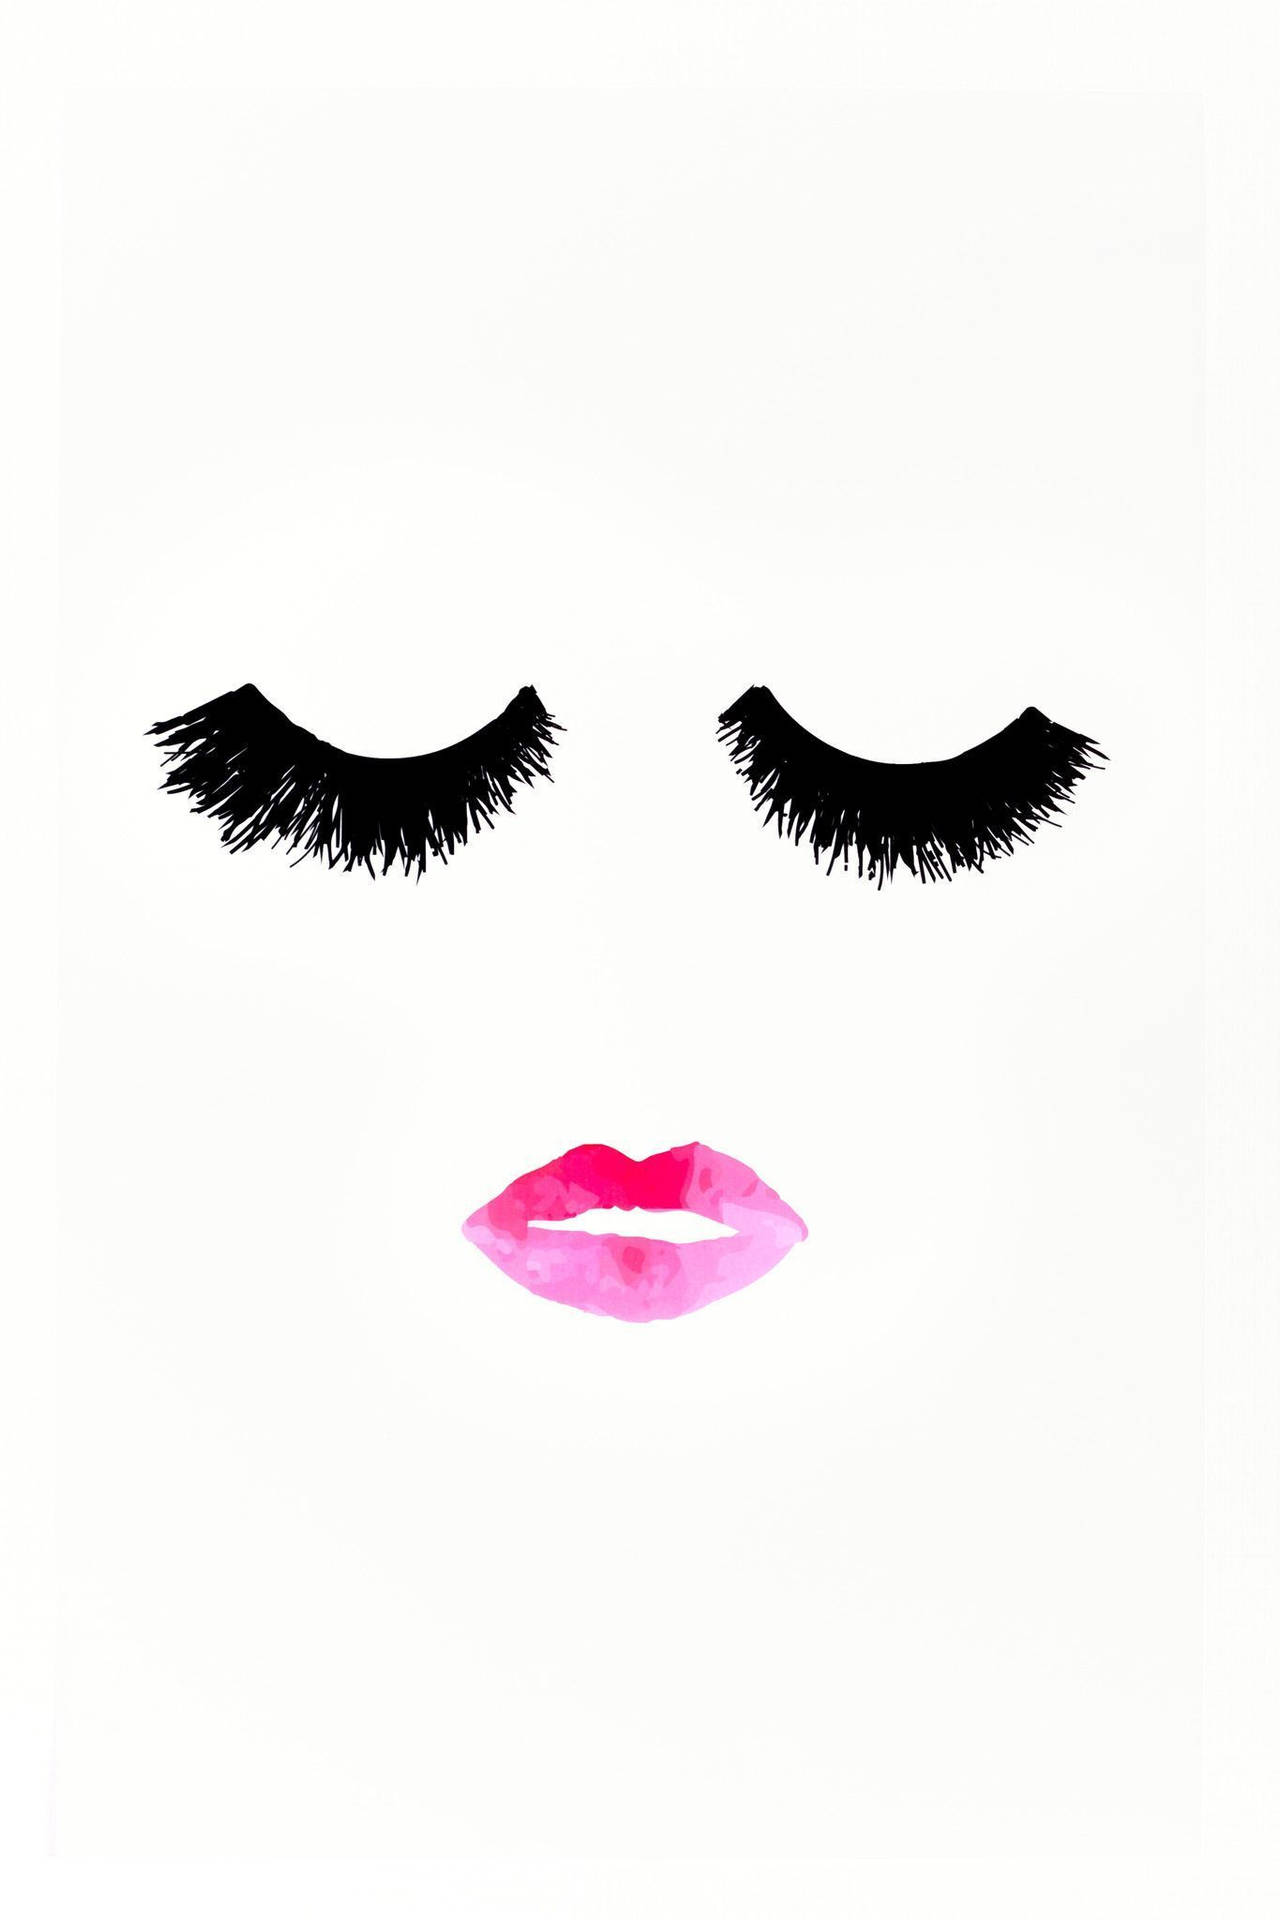 Makeup 1365X2048 Wallpaper and Background Image